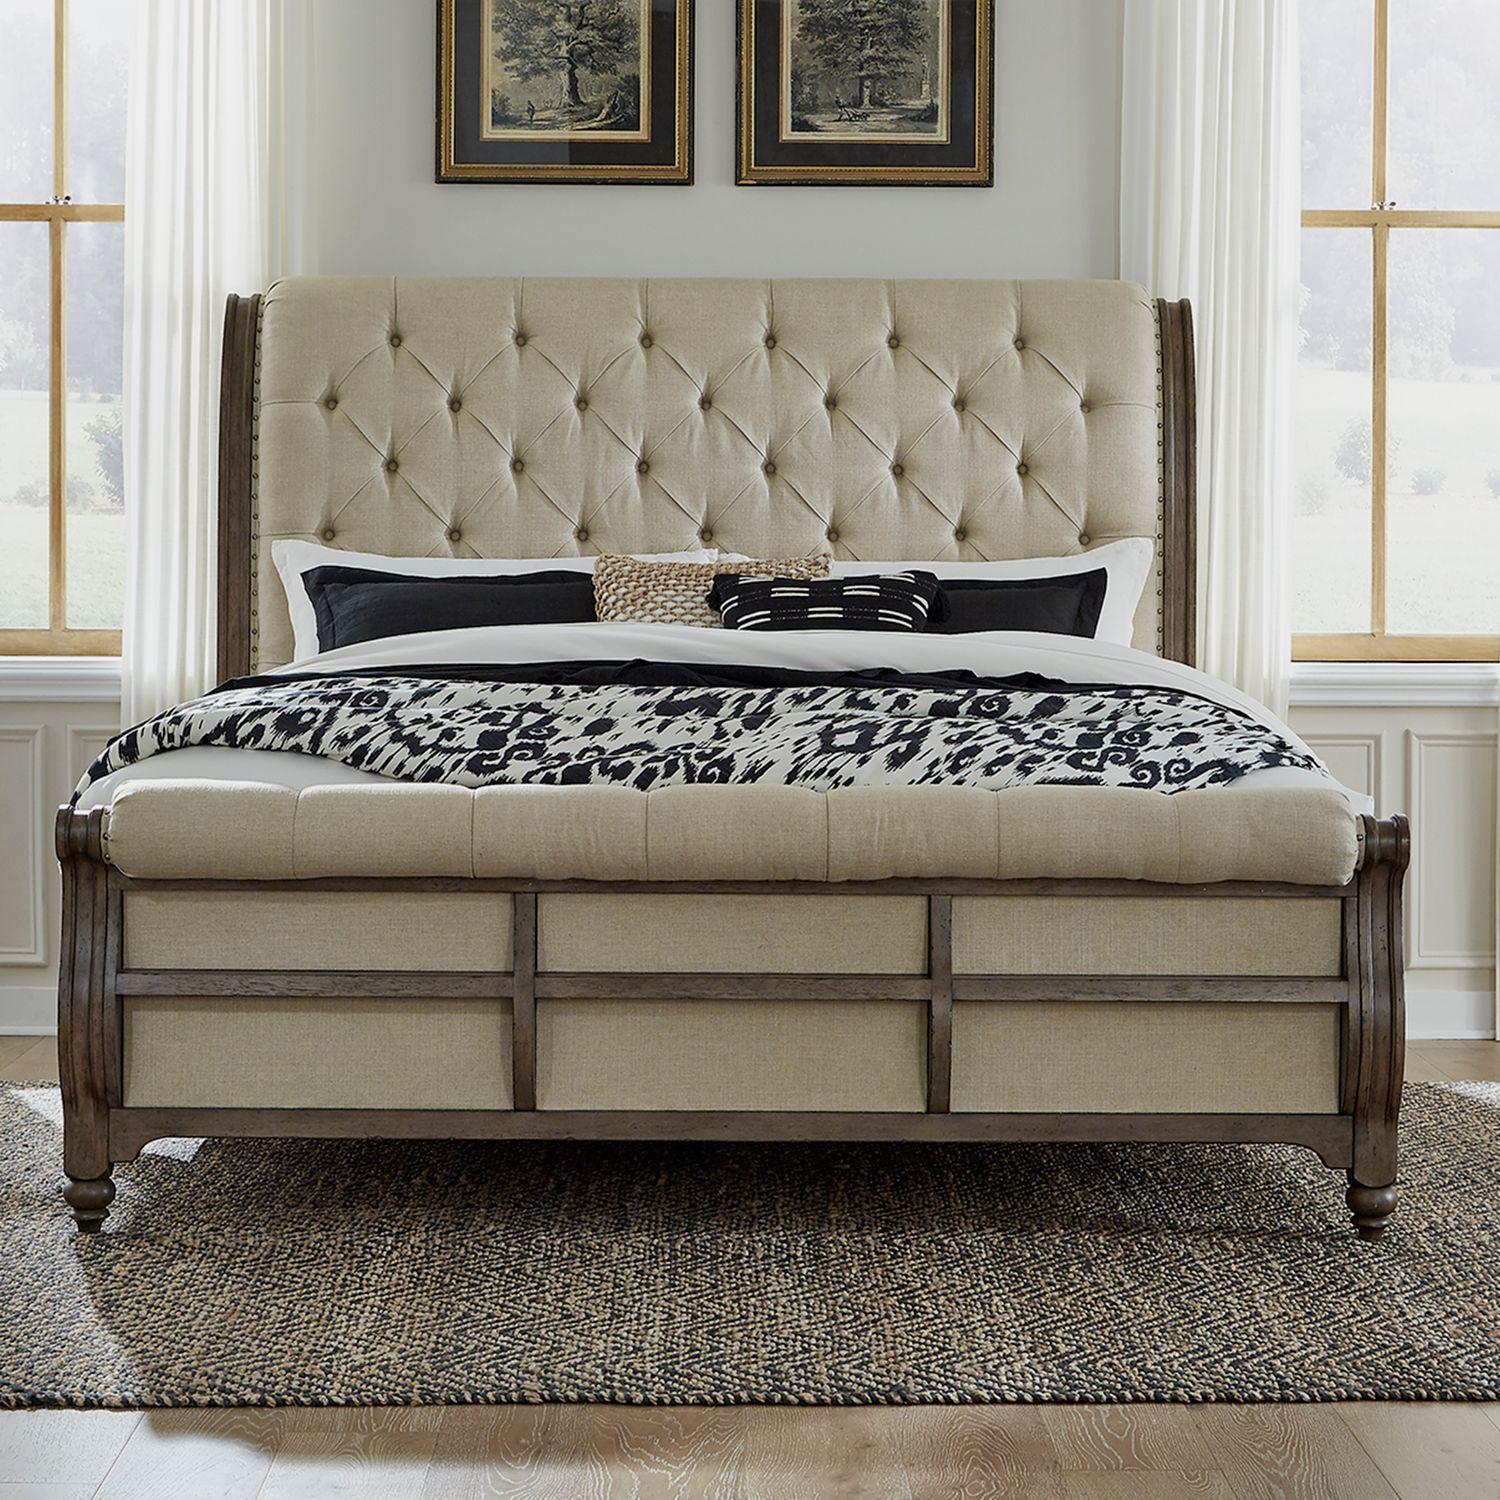 Transitional Sleigh Bed Americana Farmhouse (615-BR) 615-BR-KSL in Taupe, Black Linen